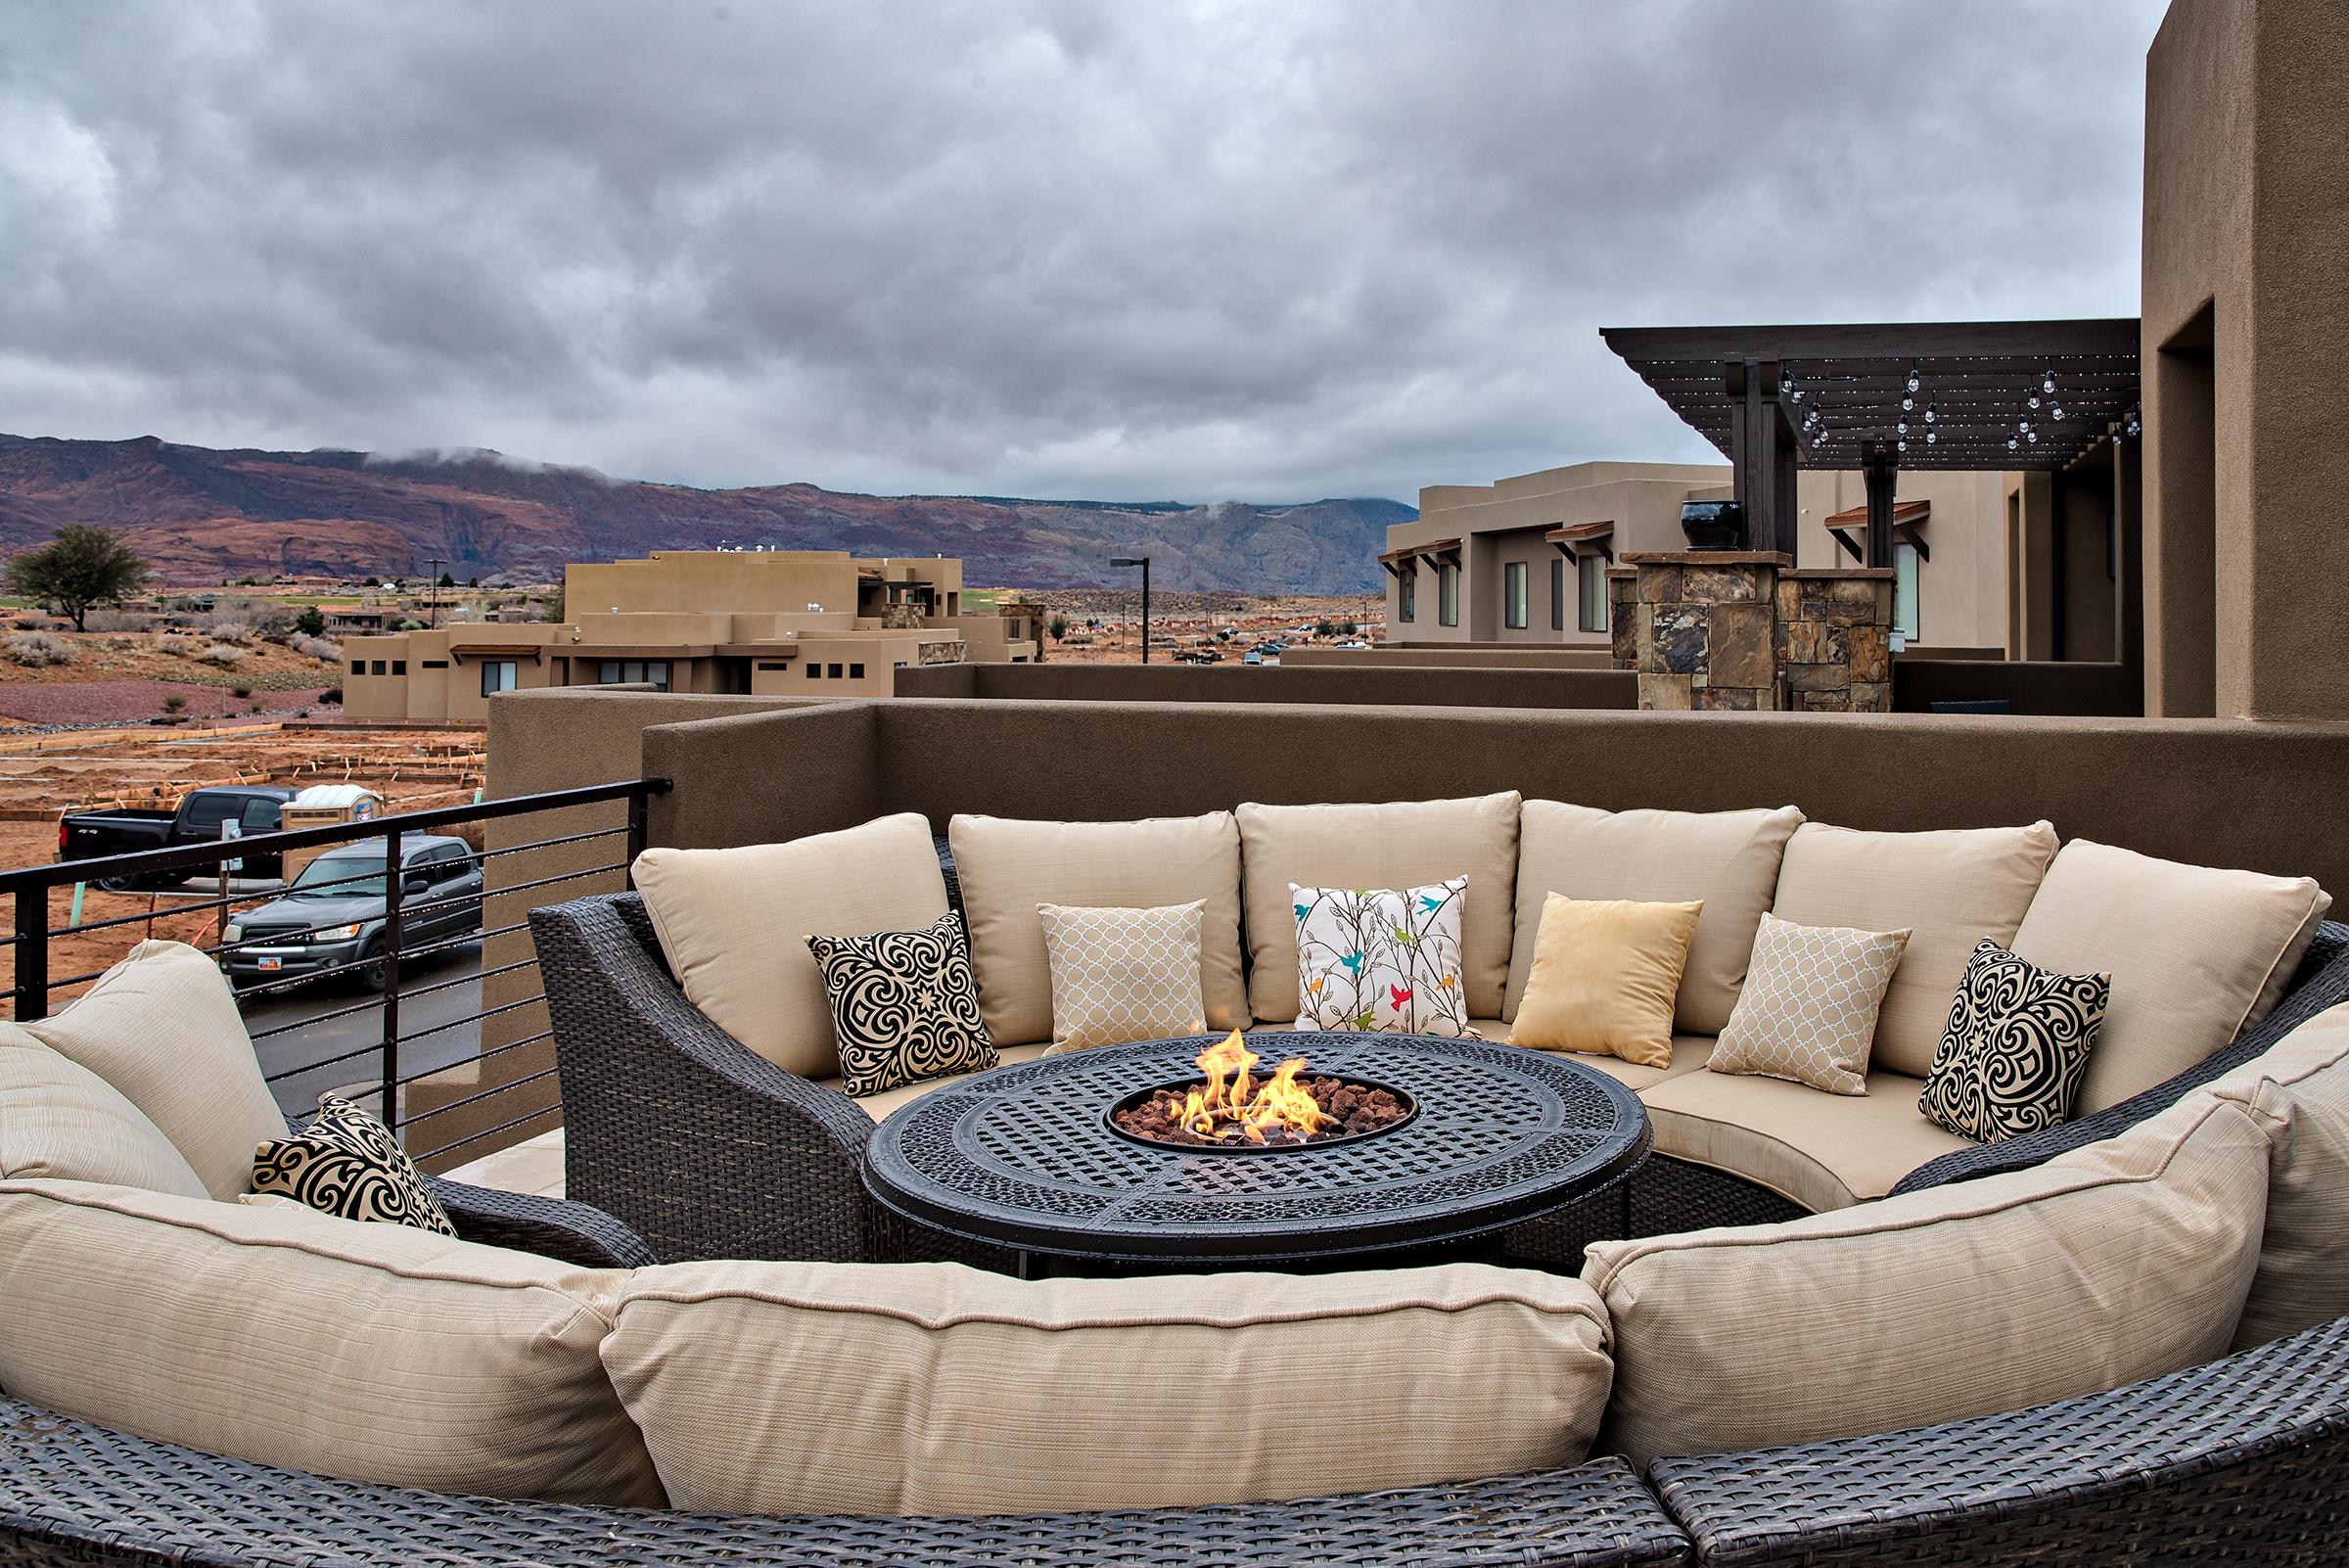 Stay warm next to the firepit and relax while watching the sunset over the red mountains.